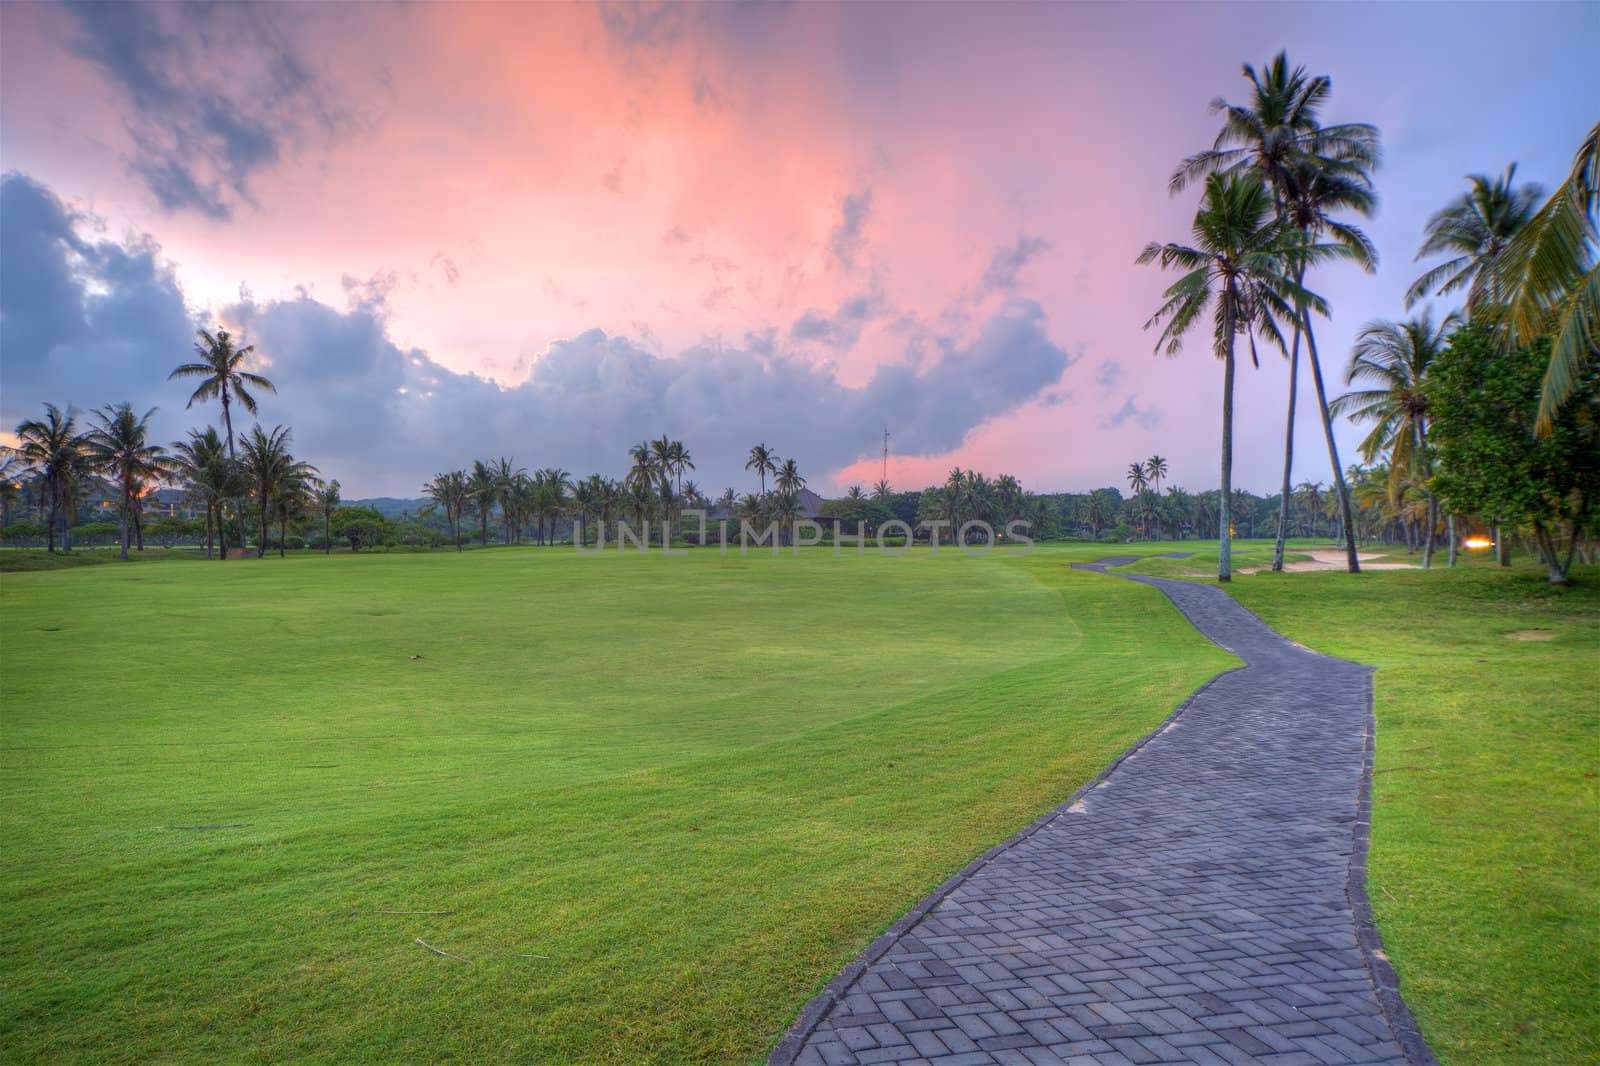 Golf field during sunset time, Bali, Indonesia. HDR photography.